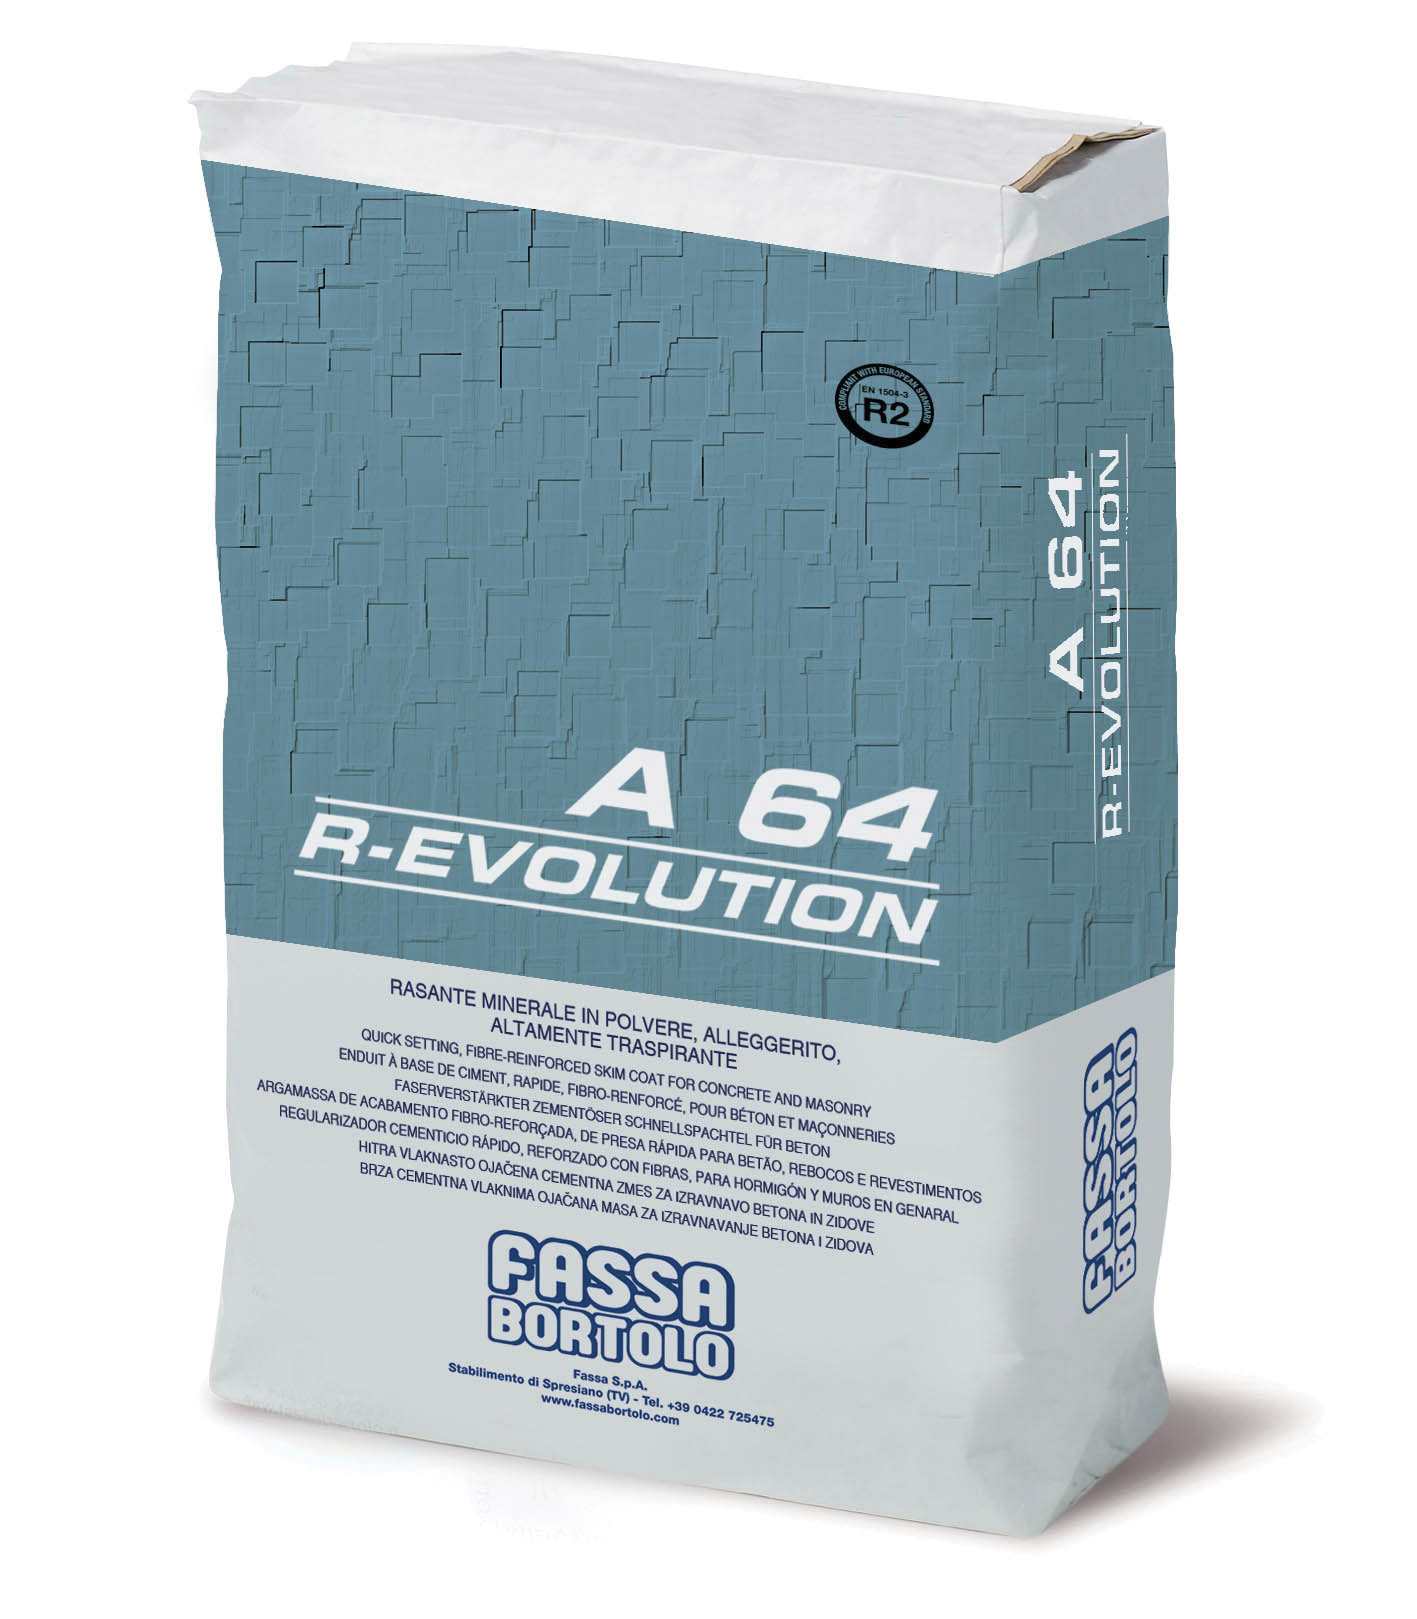 A 64 R-EVOLUTION: Fibre-reinforced, water repellent mineral skim coat made from lime and hydraulic binders, for application on surfaces with high mechanical strength, for interiors and exteriors